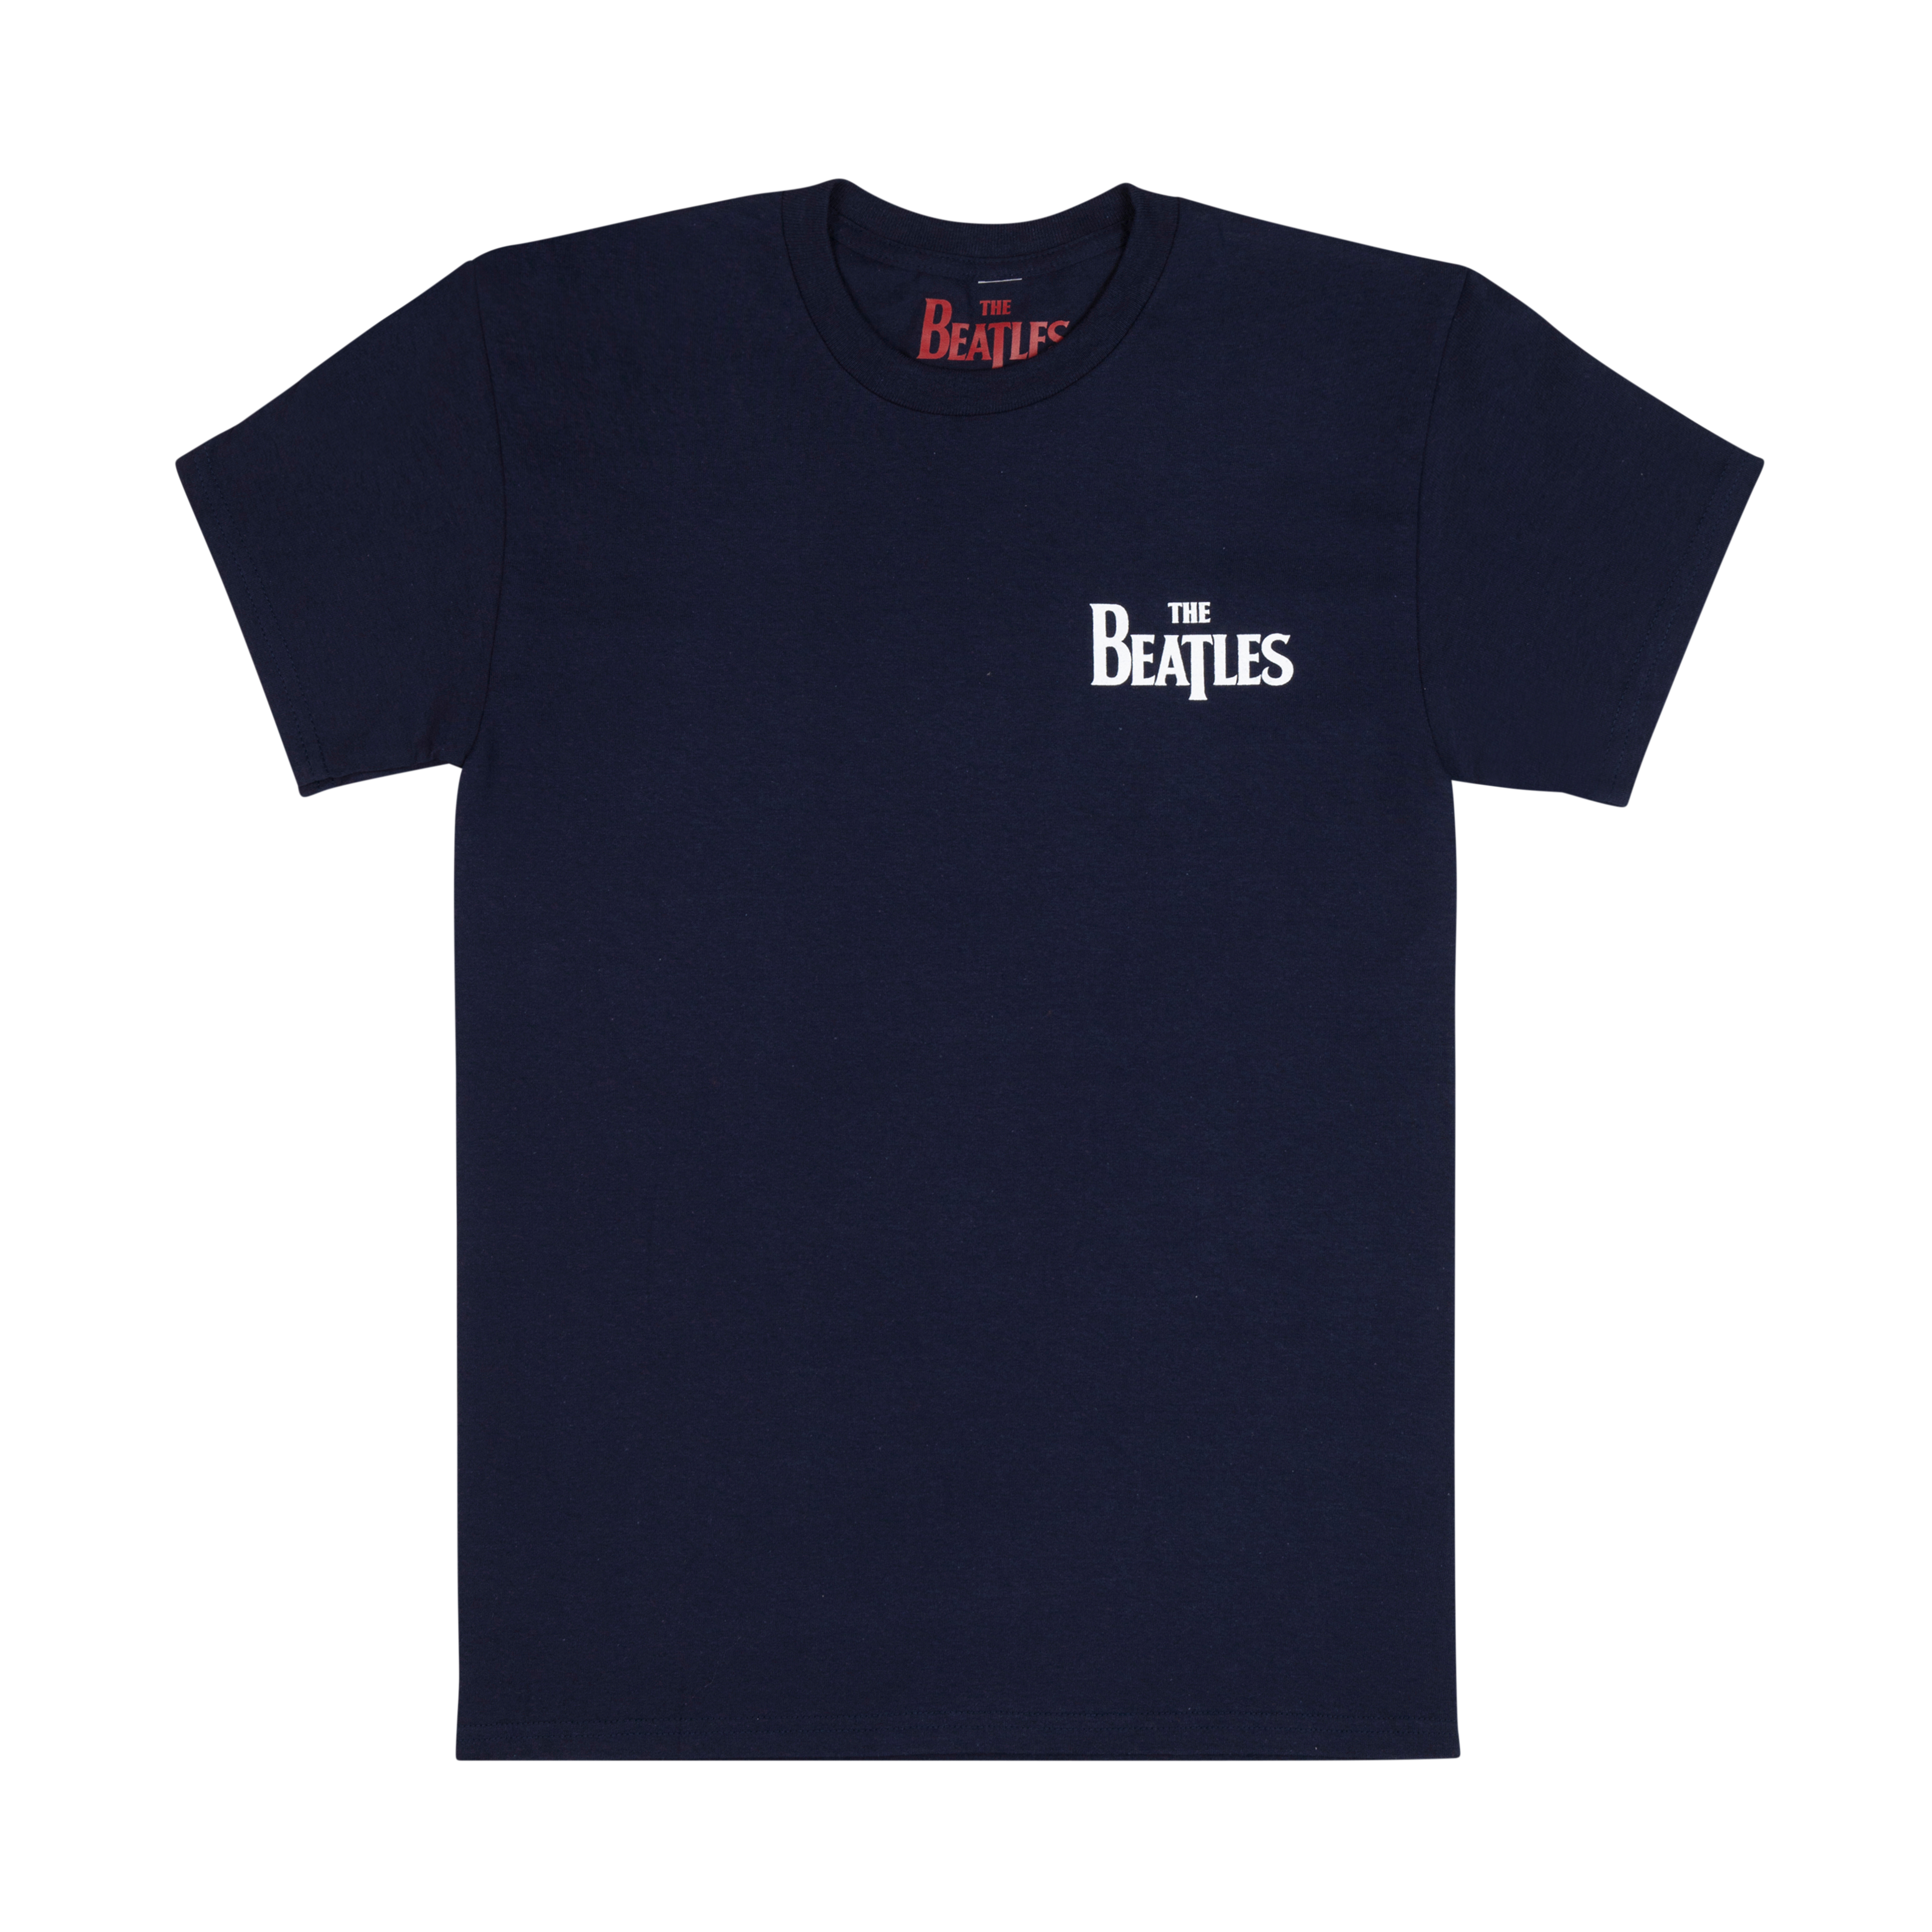 The Beatles - The Beatles Number 1 T-Shirt in Navy